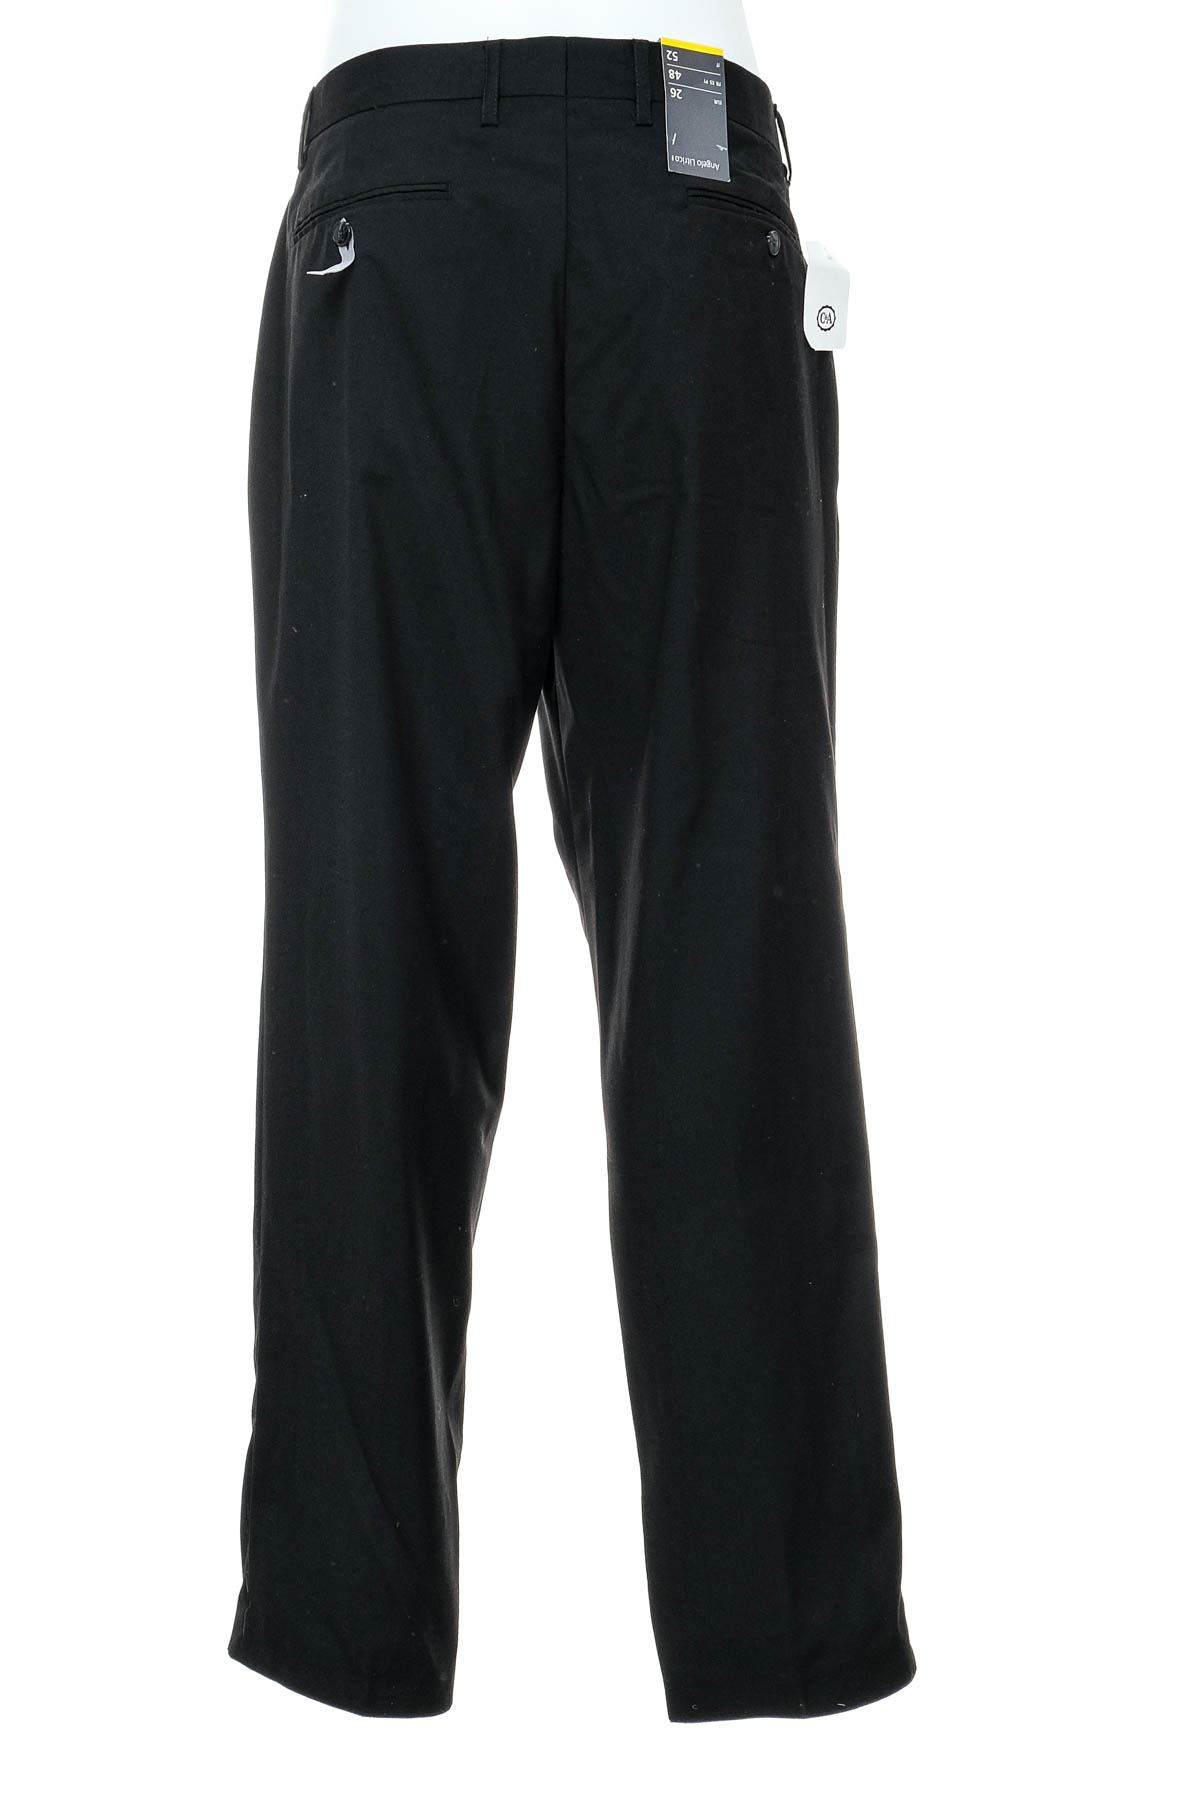 Men's trousers - Angelo Litrico x C&A - 1